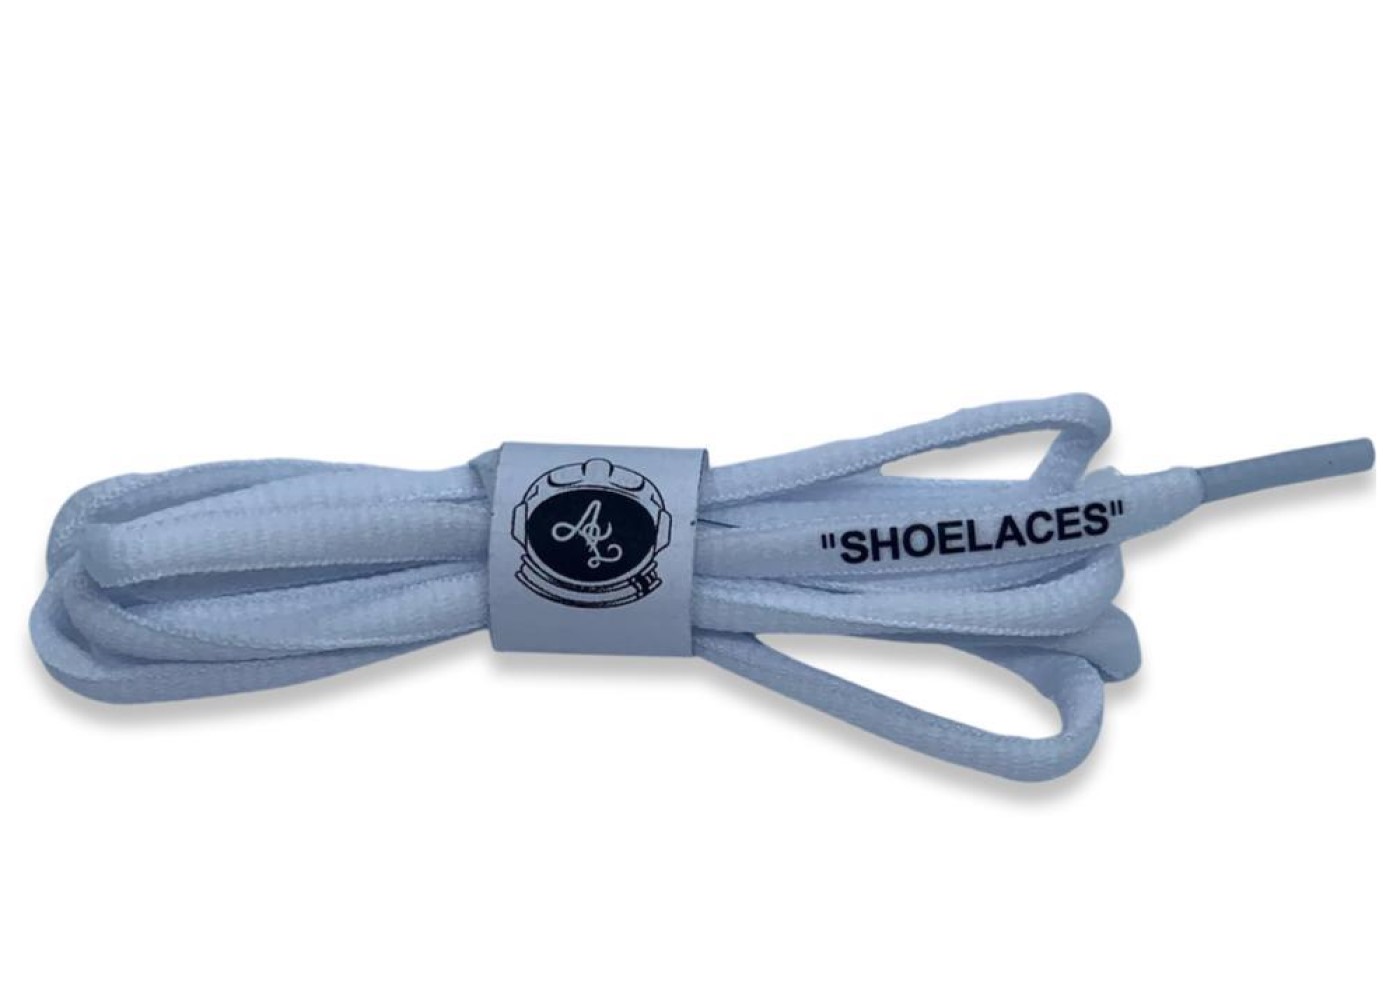 Astrolaces Oval Laces “SHOELACES” White